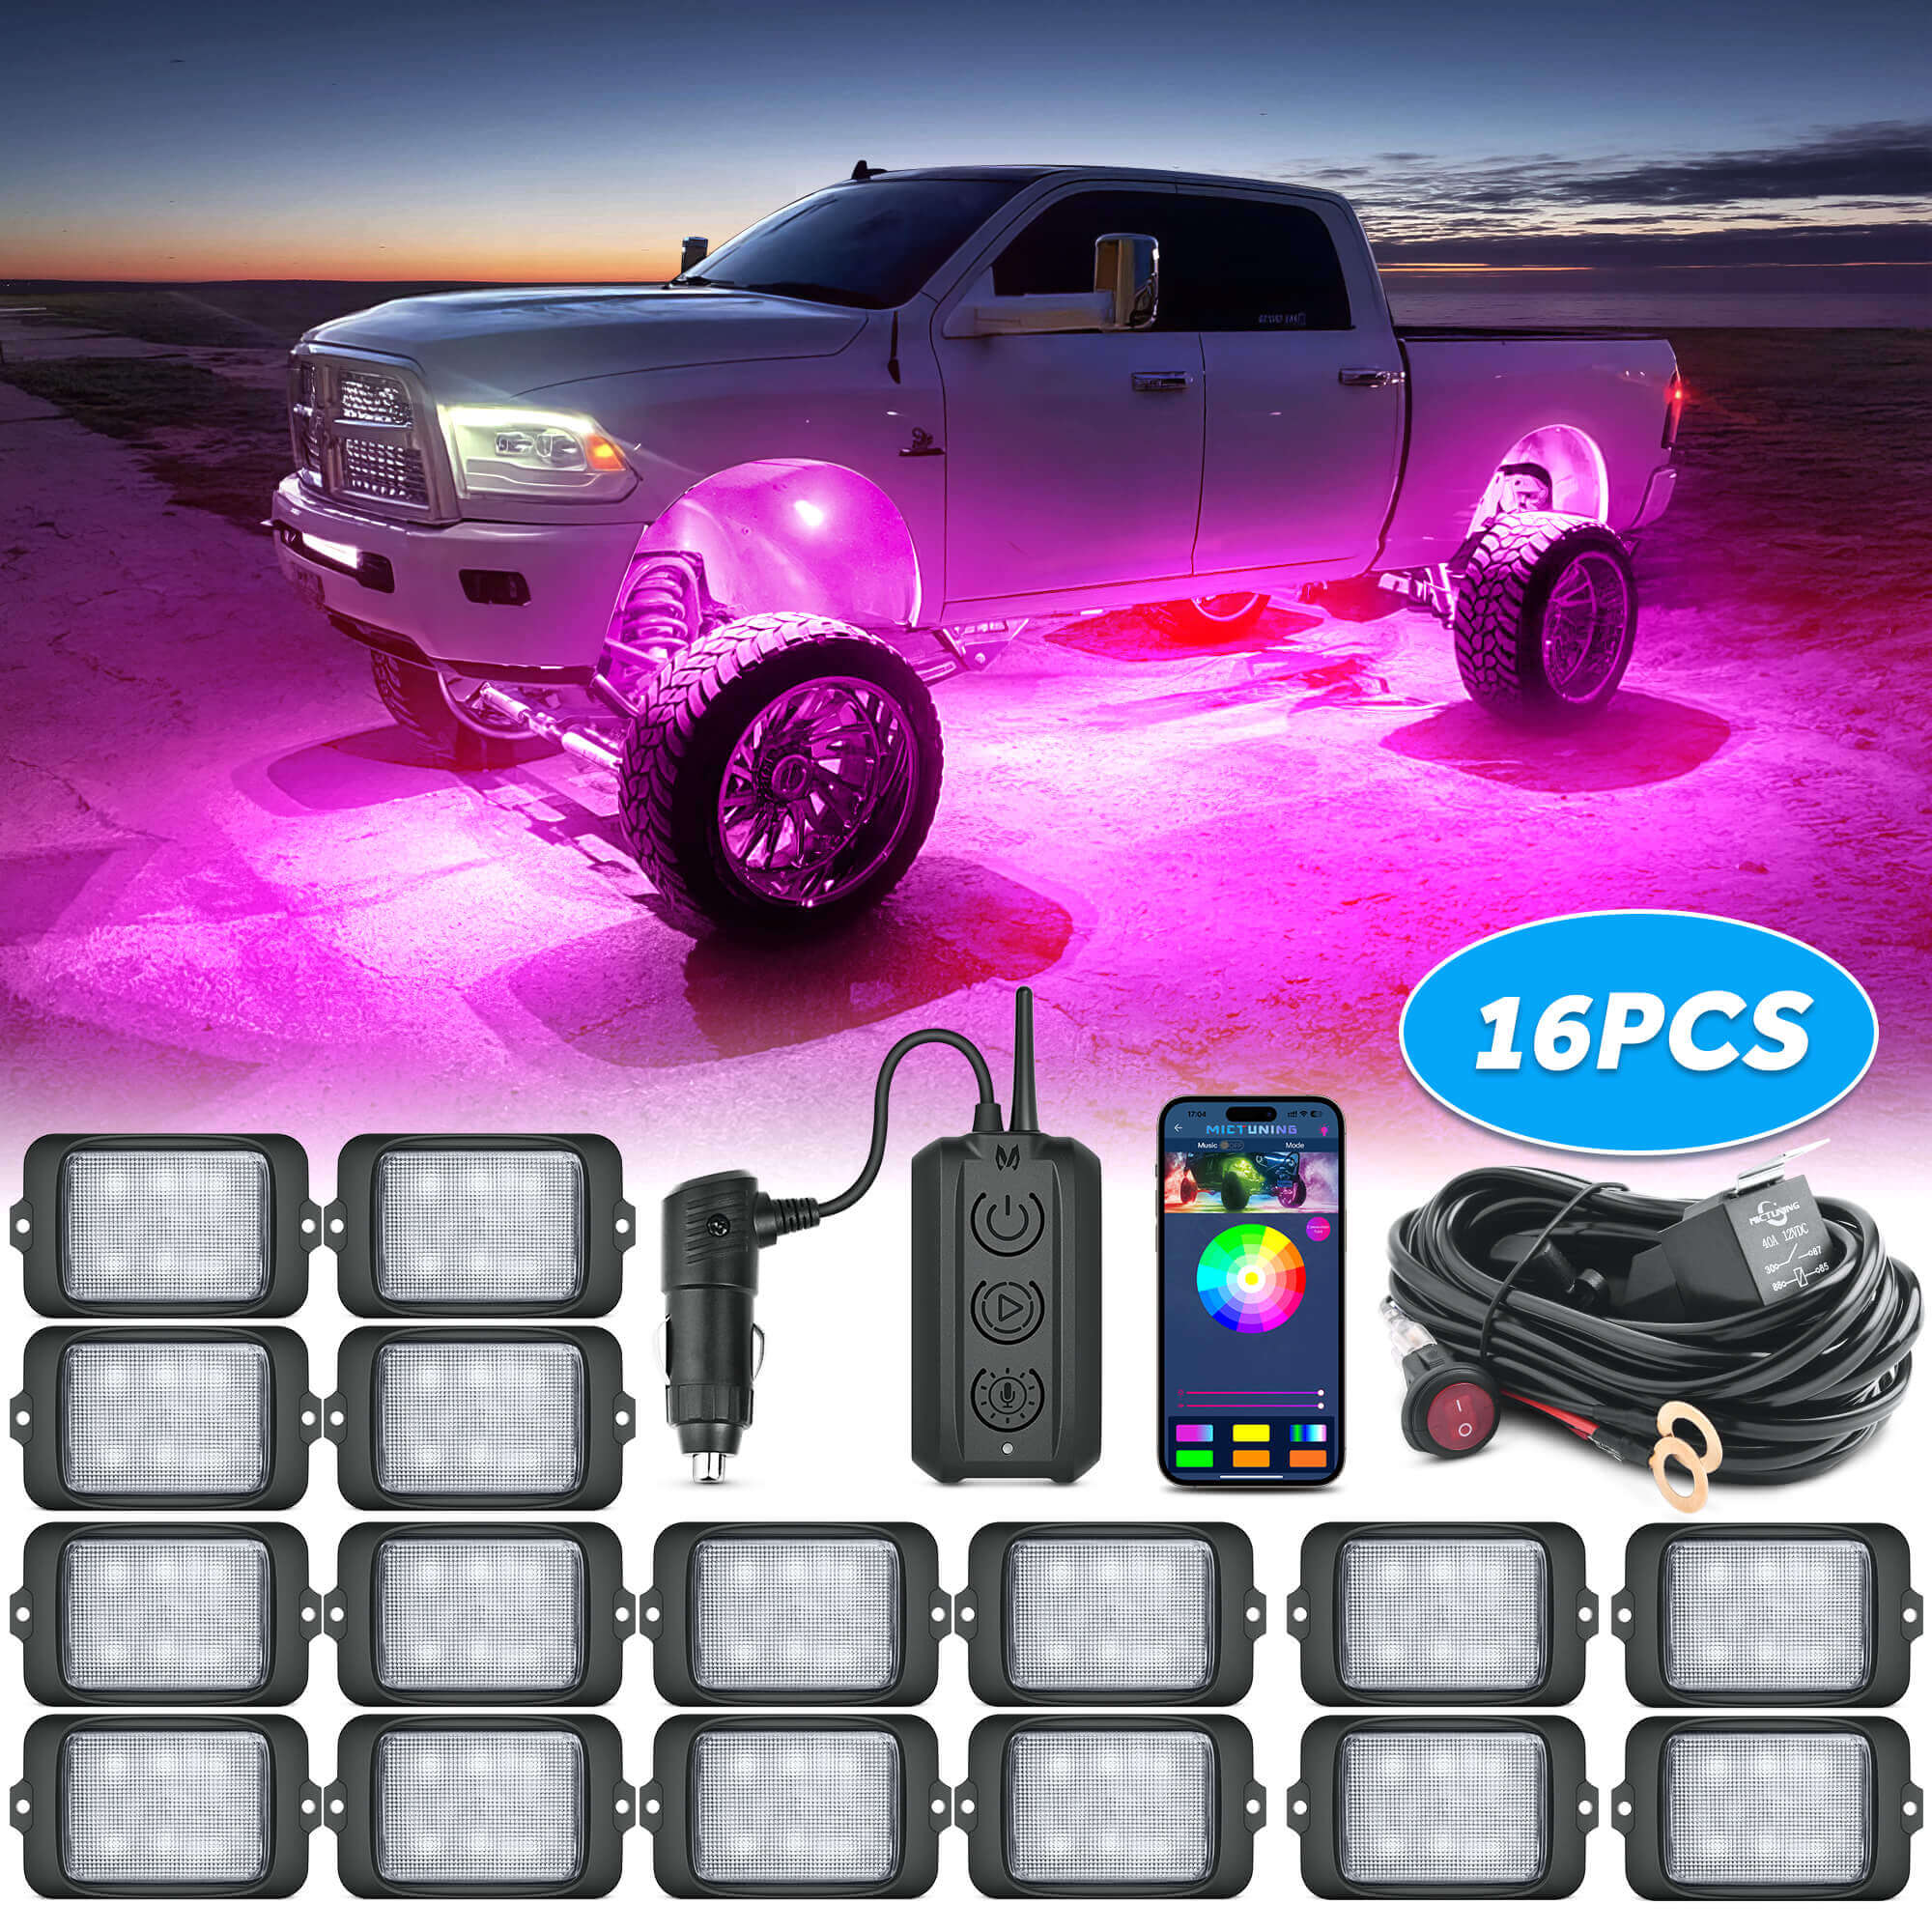 MICTUNING 16 Pods C3 Extensible RGBW LED Rock Lights Wireless